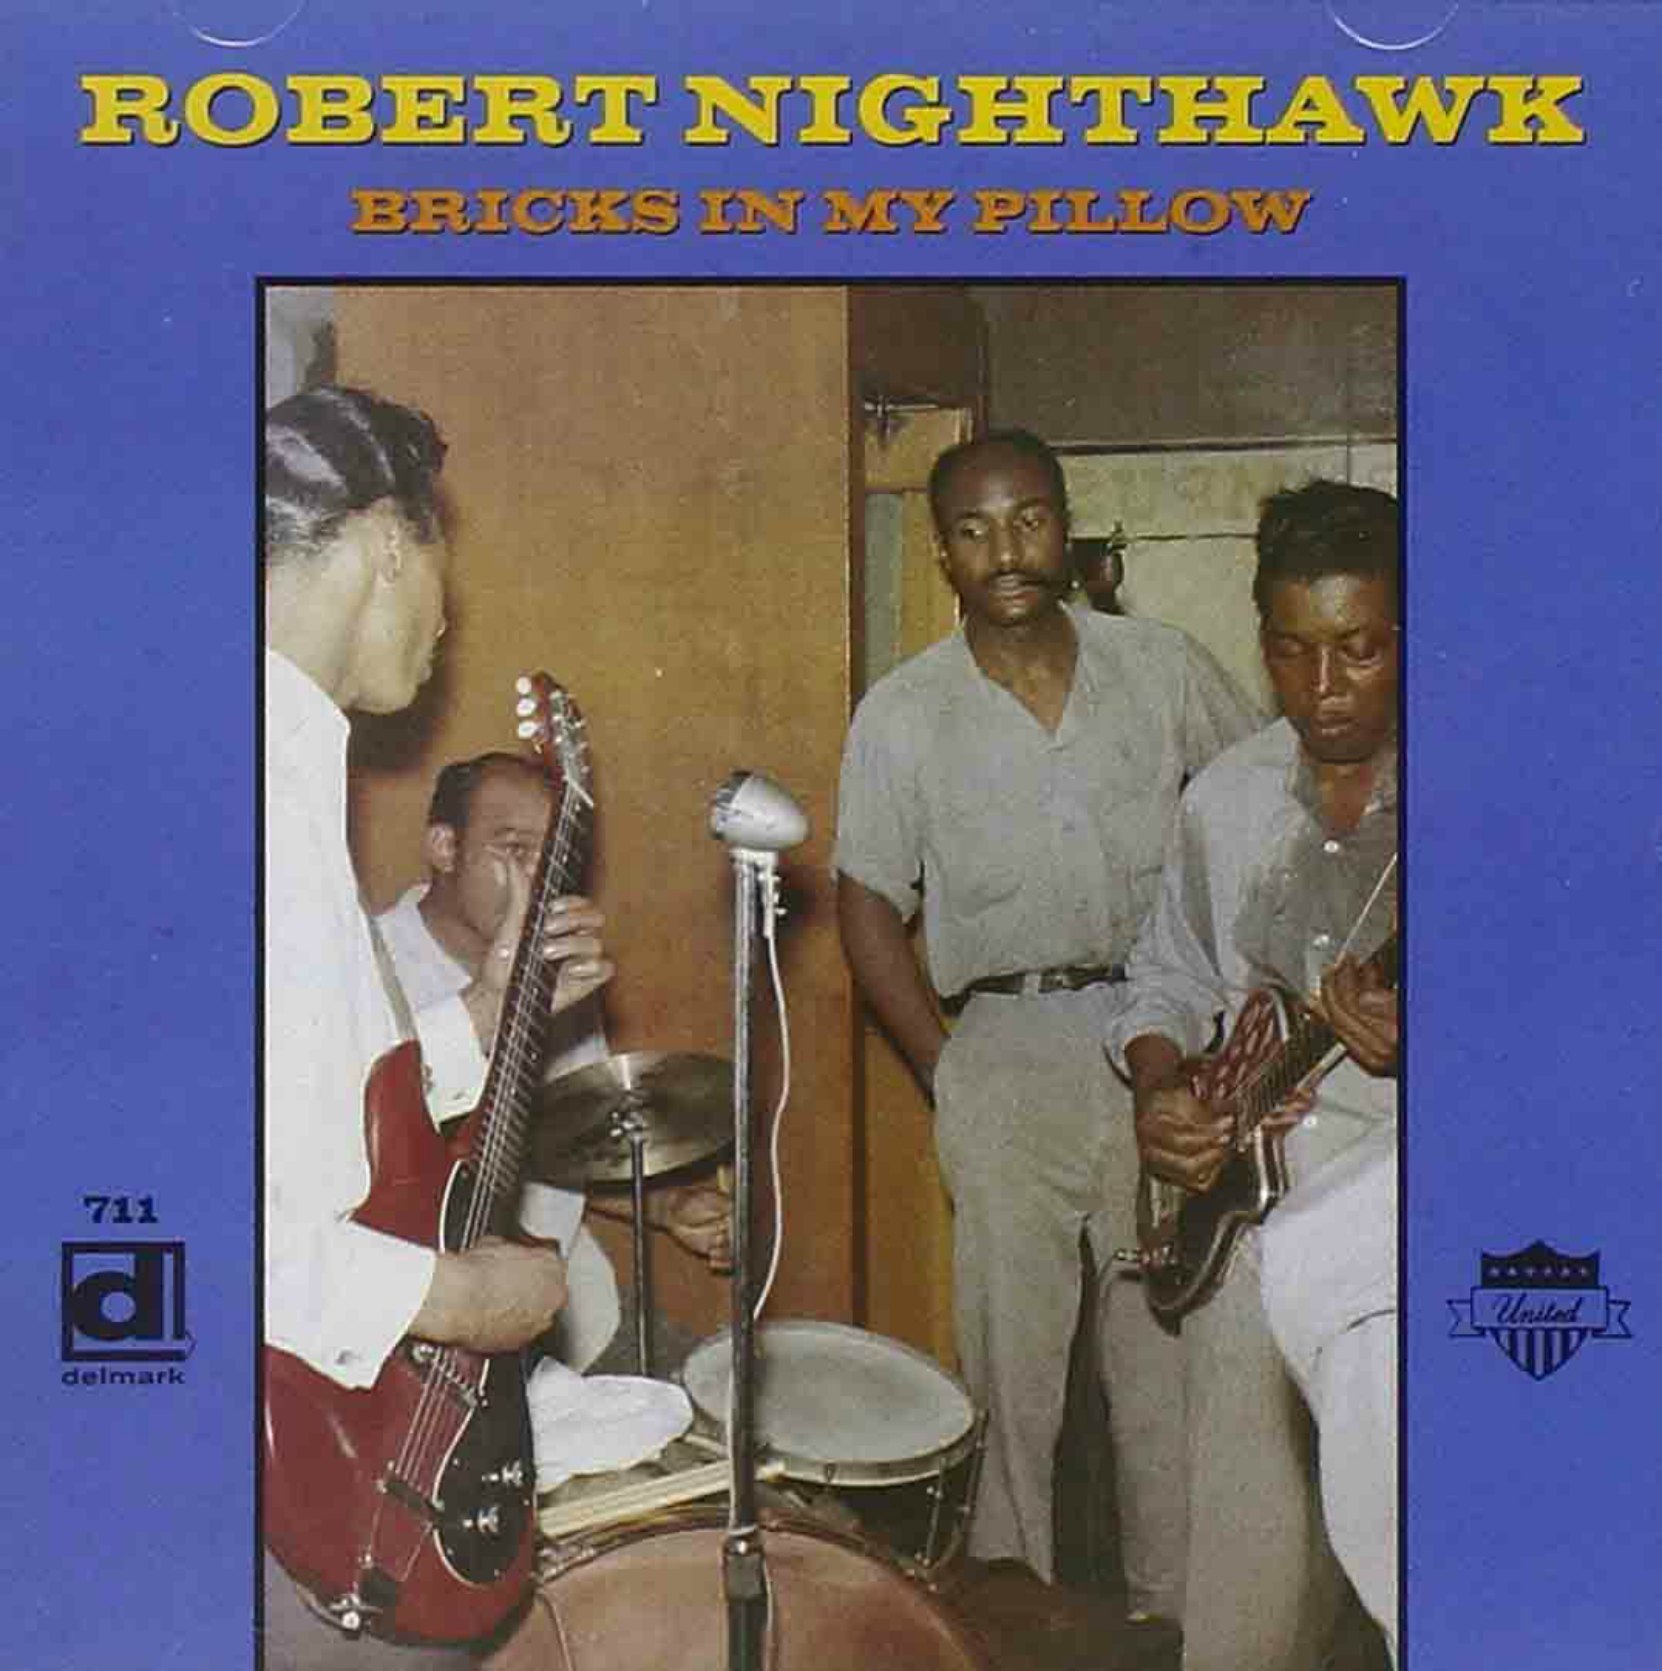 CD cover, Bricks In My Pillow by Robert Nighthawk, on Delmark Records. This CD contains tracks from 1951 and 1952 sessions.